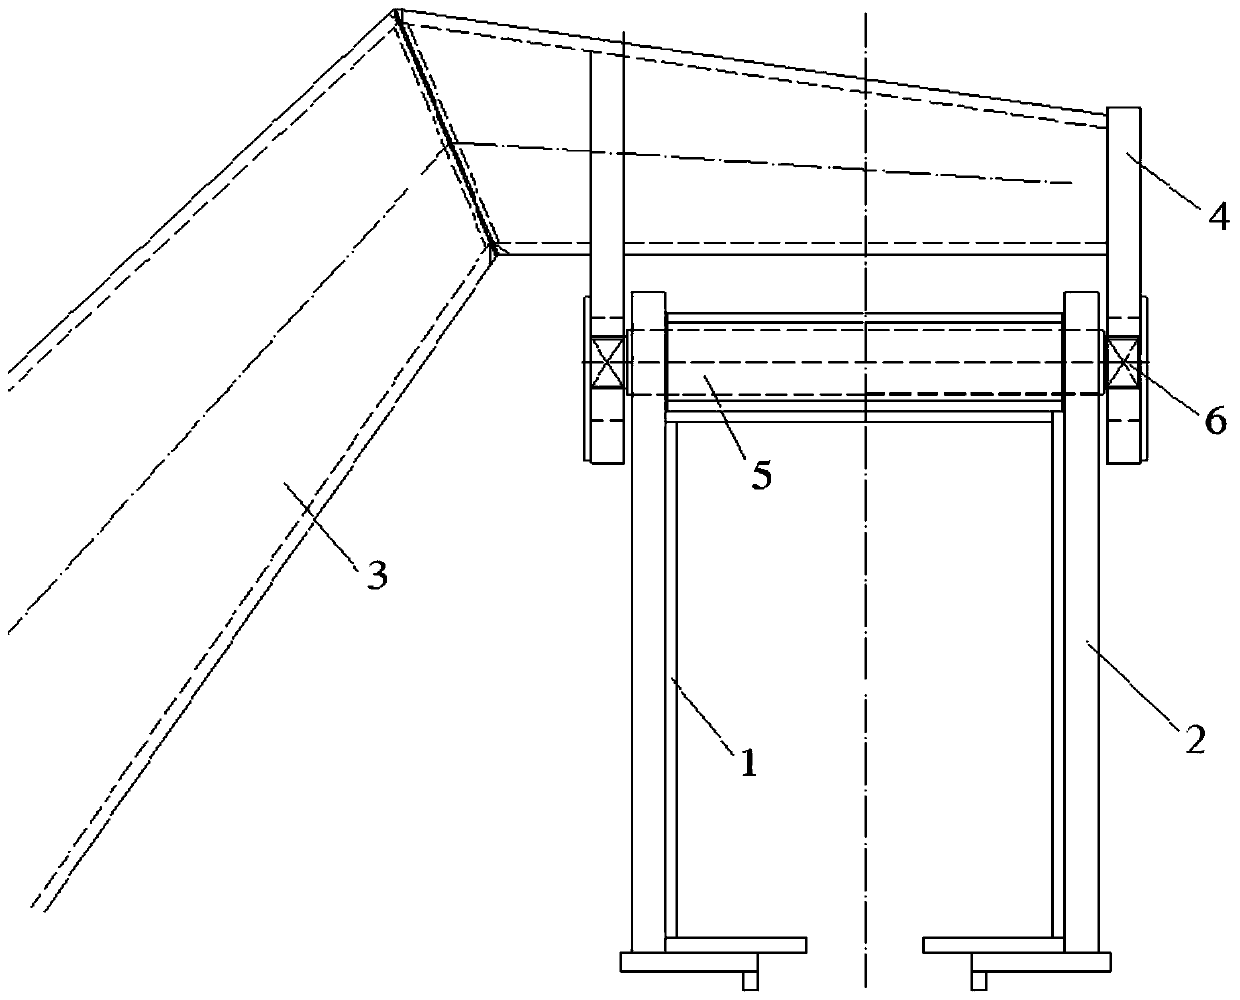 Novel suspended monorail pier and track beam connecting structure